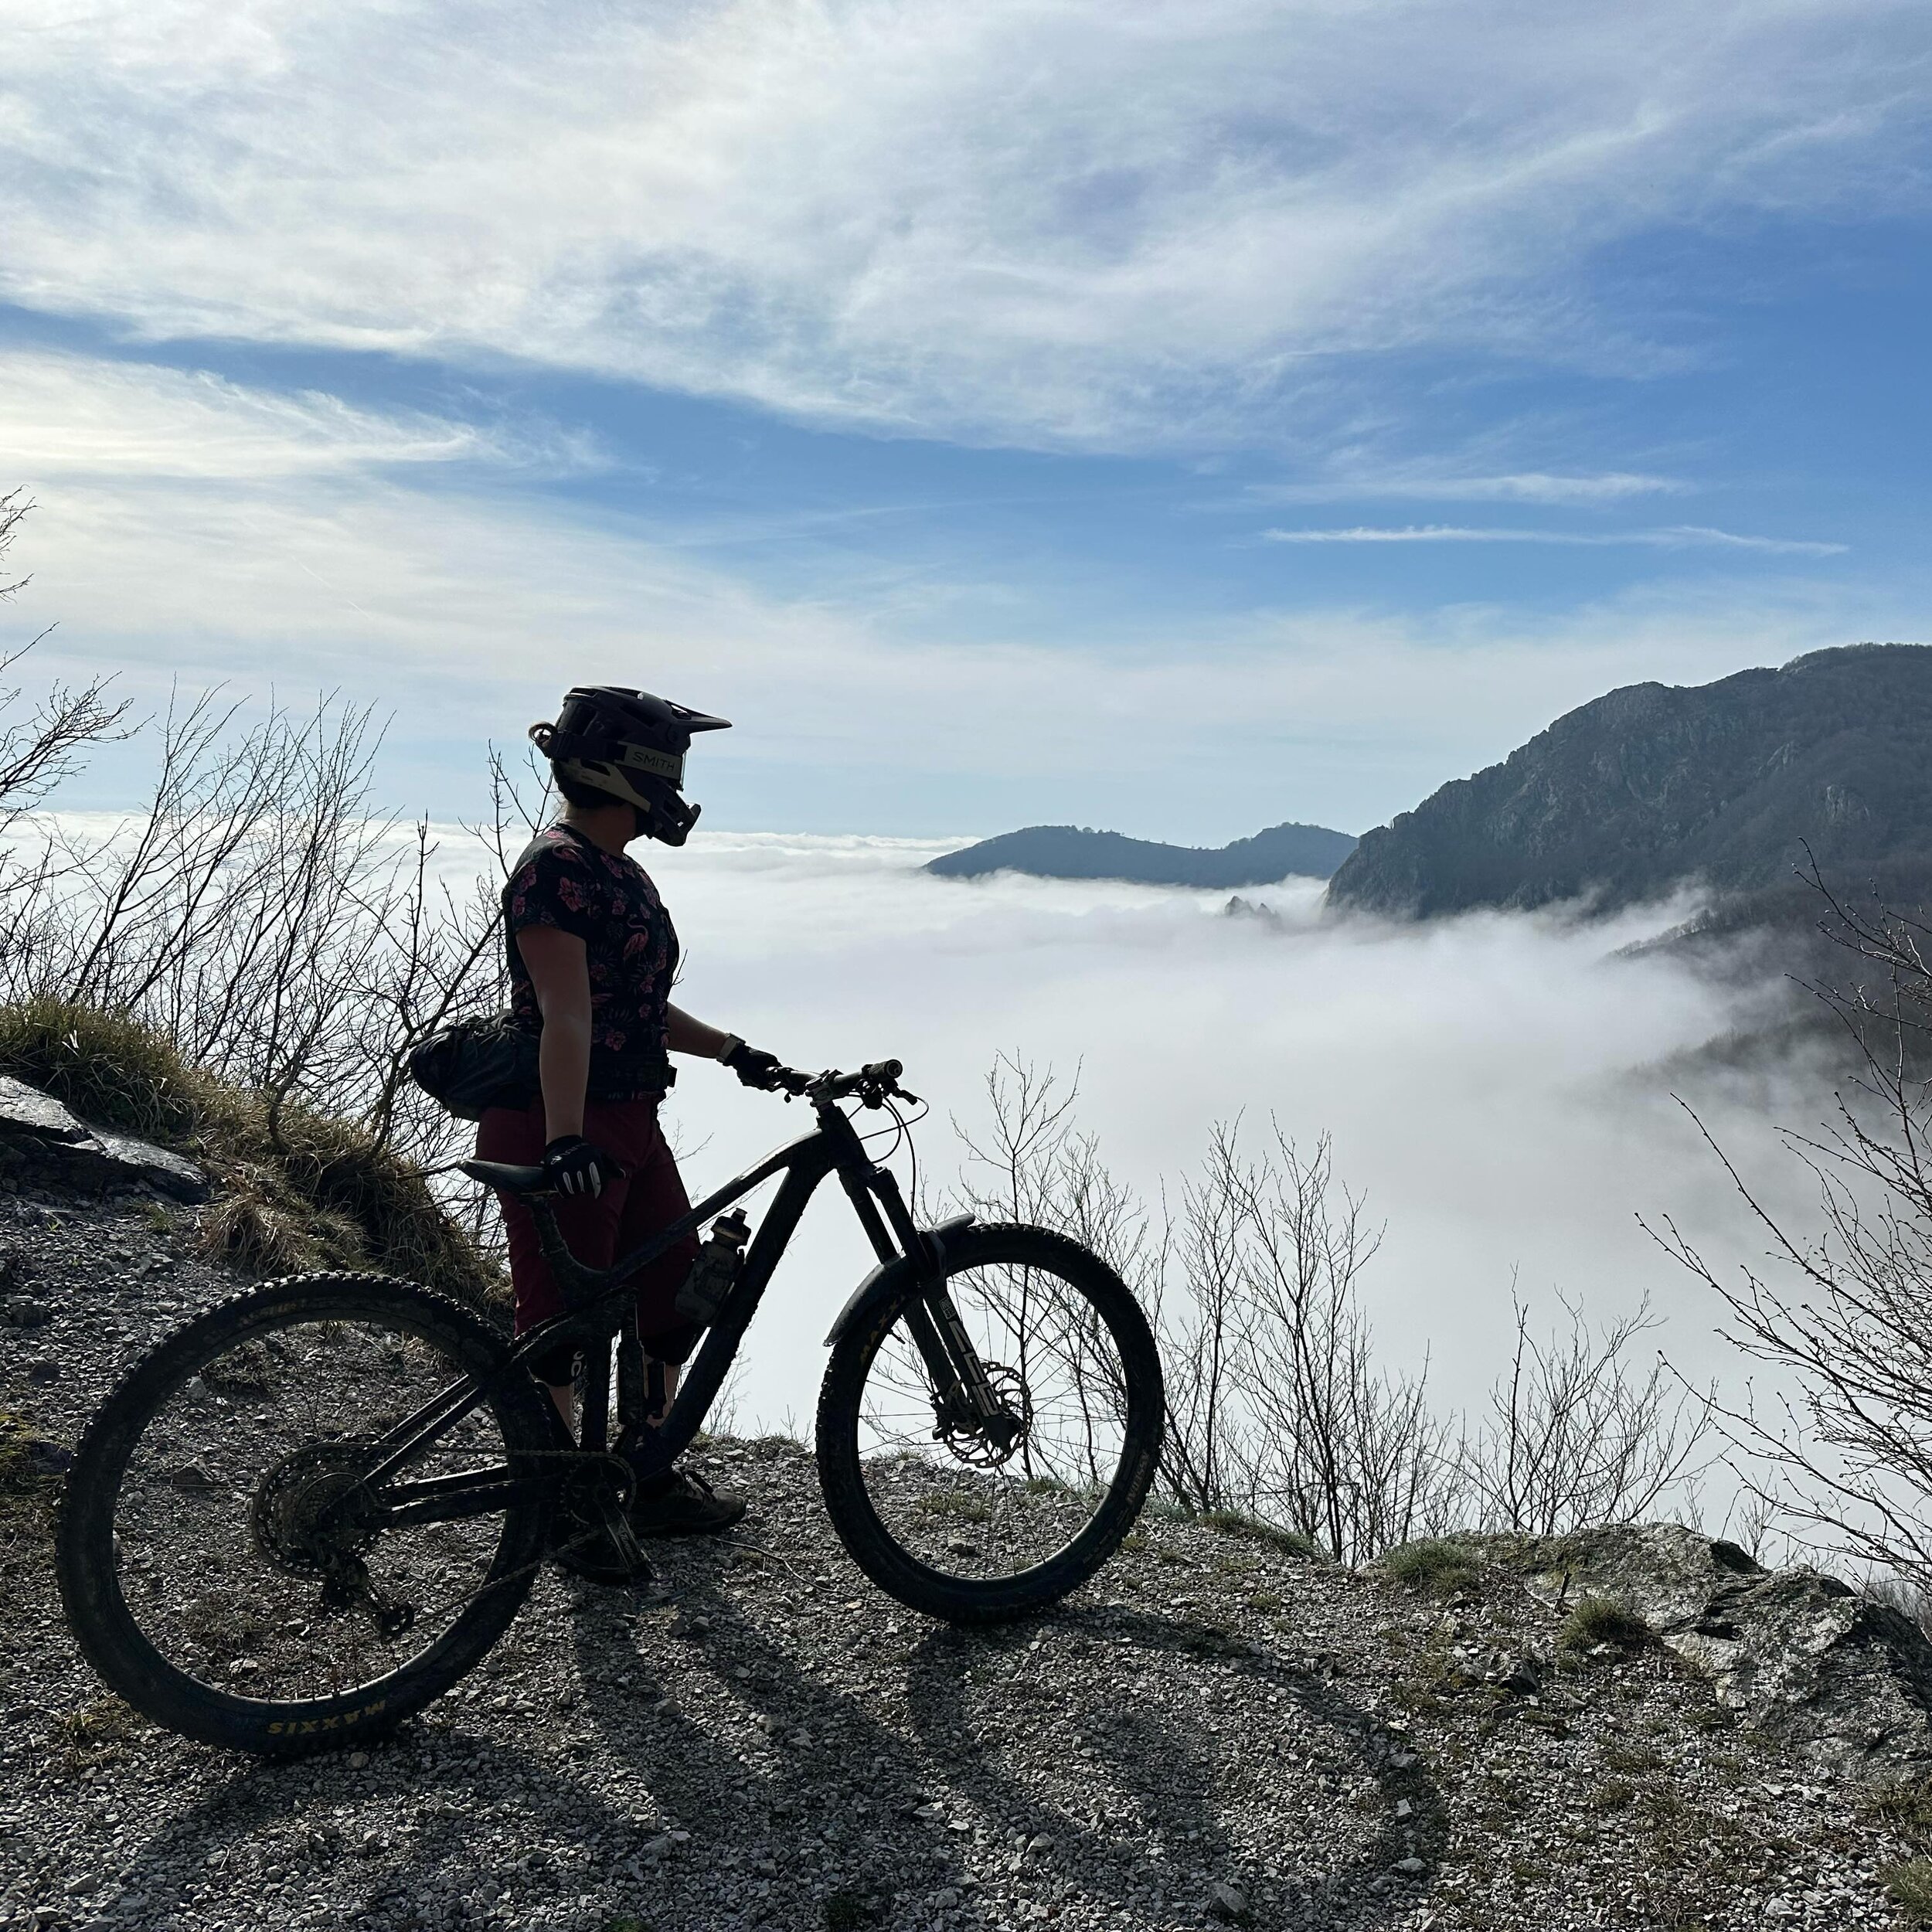 Riding above the clouds in Italy!!! 🇮🇹 Woohoo! I love where bikes can take you, physically and mentally!! 👌🏼

Thanks for the pic and being an awesome holiday bike buddy @diana_mclaren 🙌🏼 

Tell me about your biking adventure plans?! Are you a l